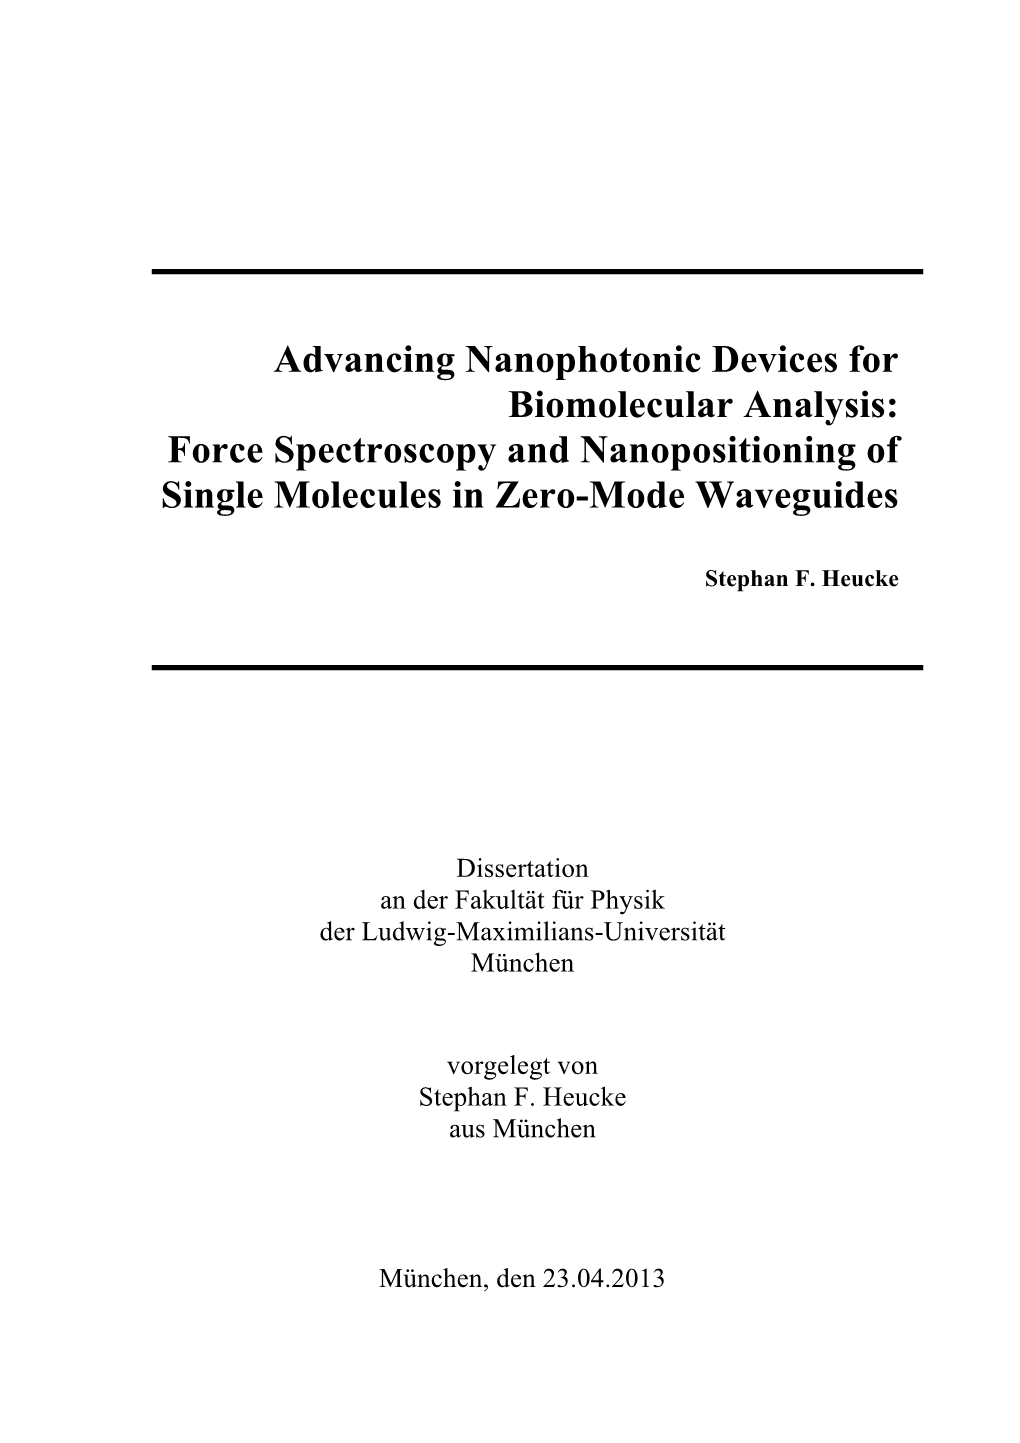 Fadvancing Nanophotonic Devices for Biomolecular Analysisorce Spectroscopy And